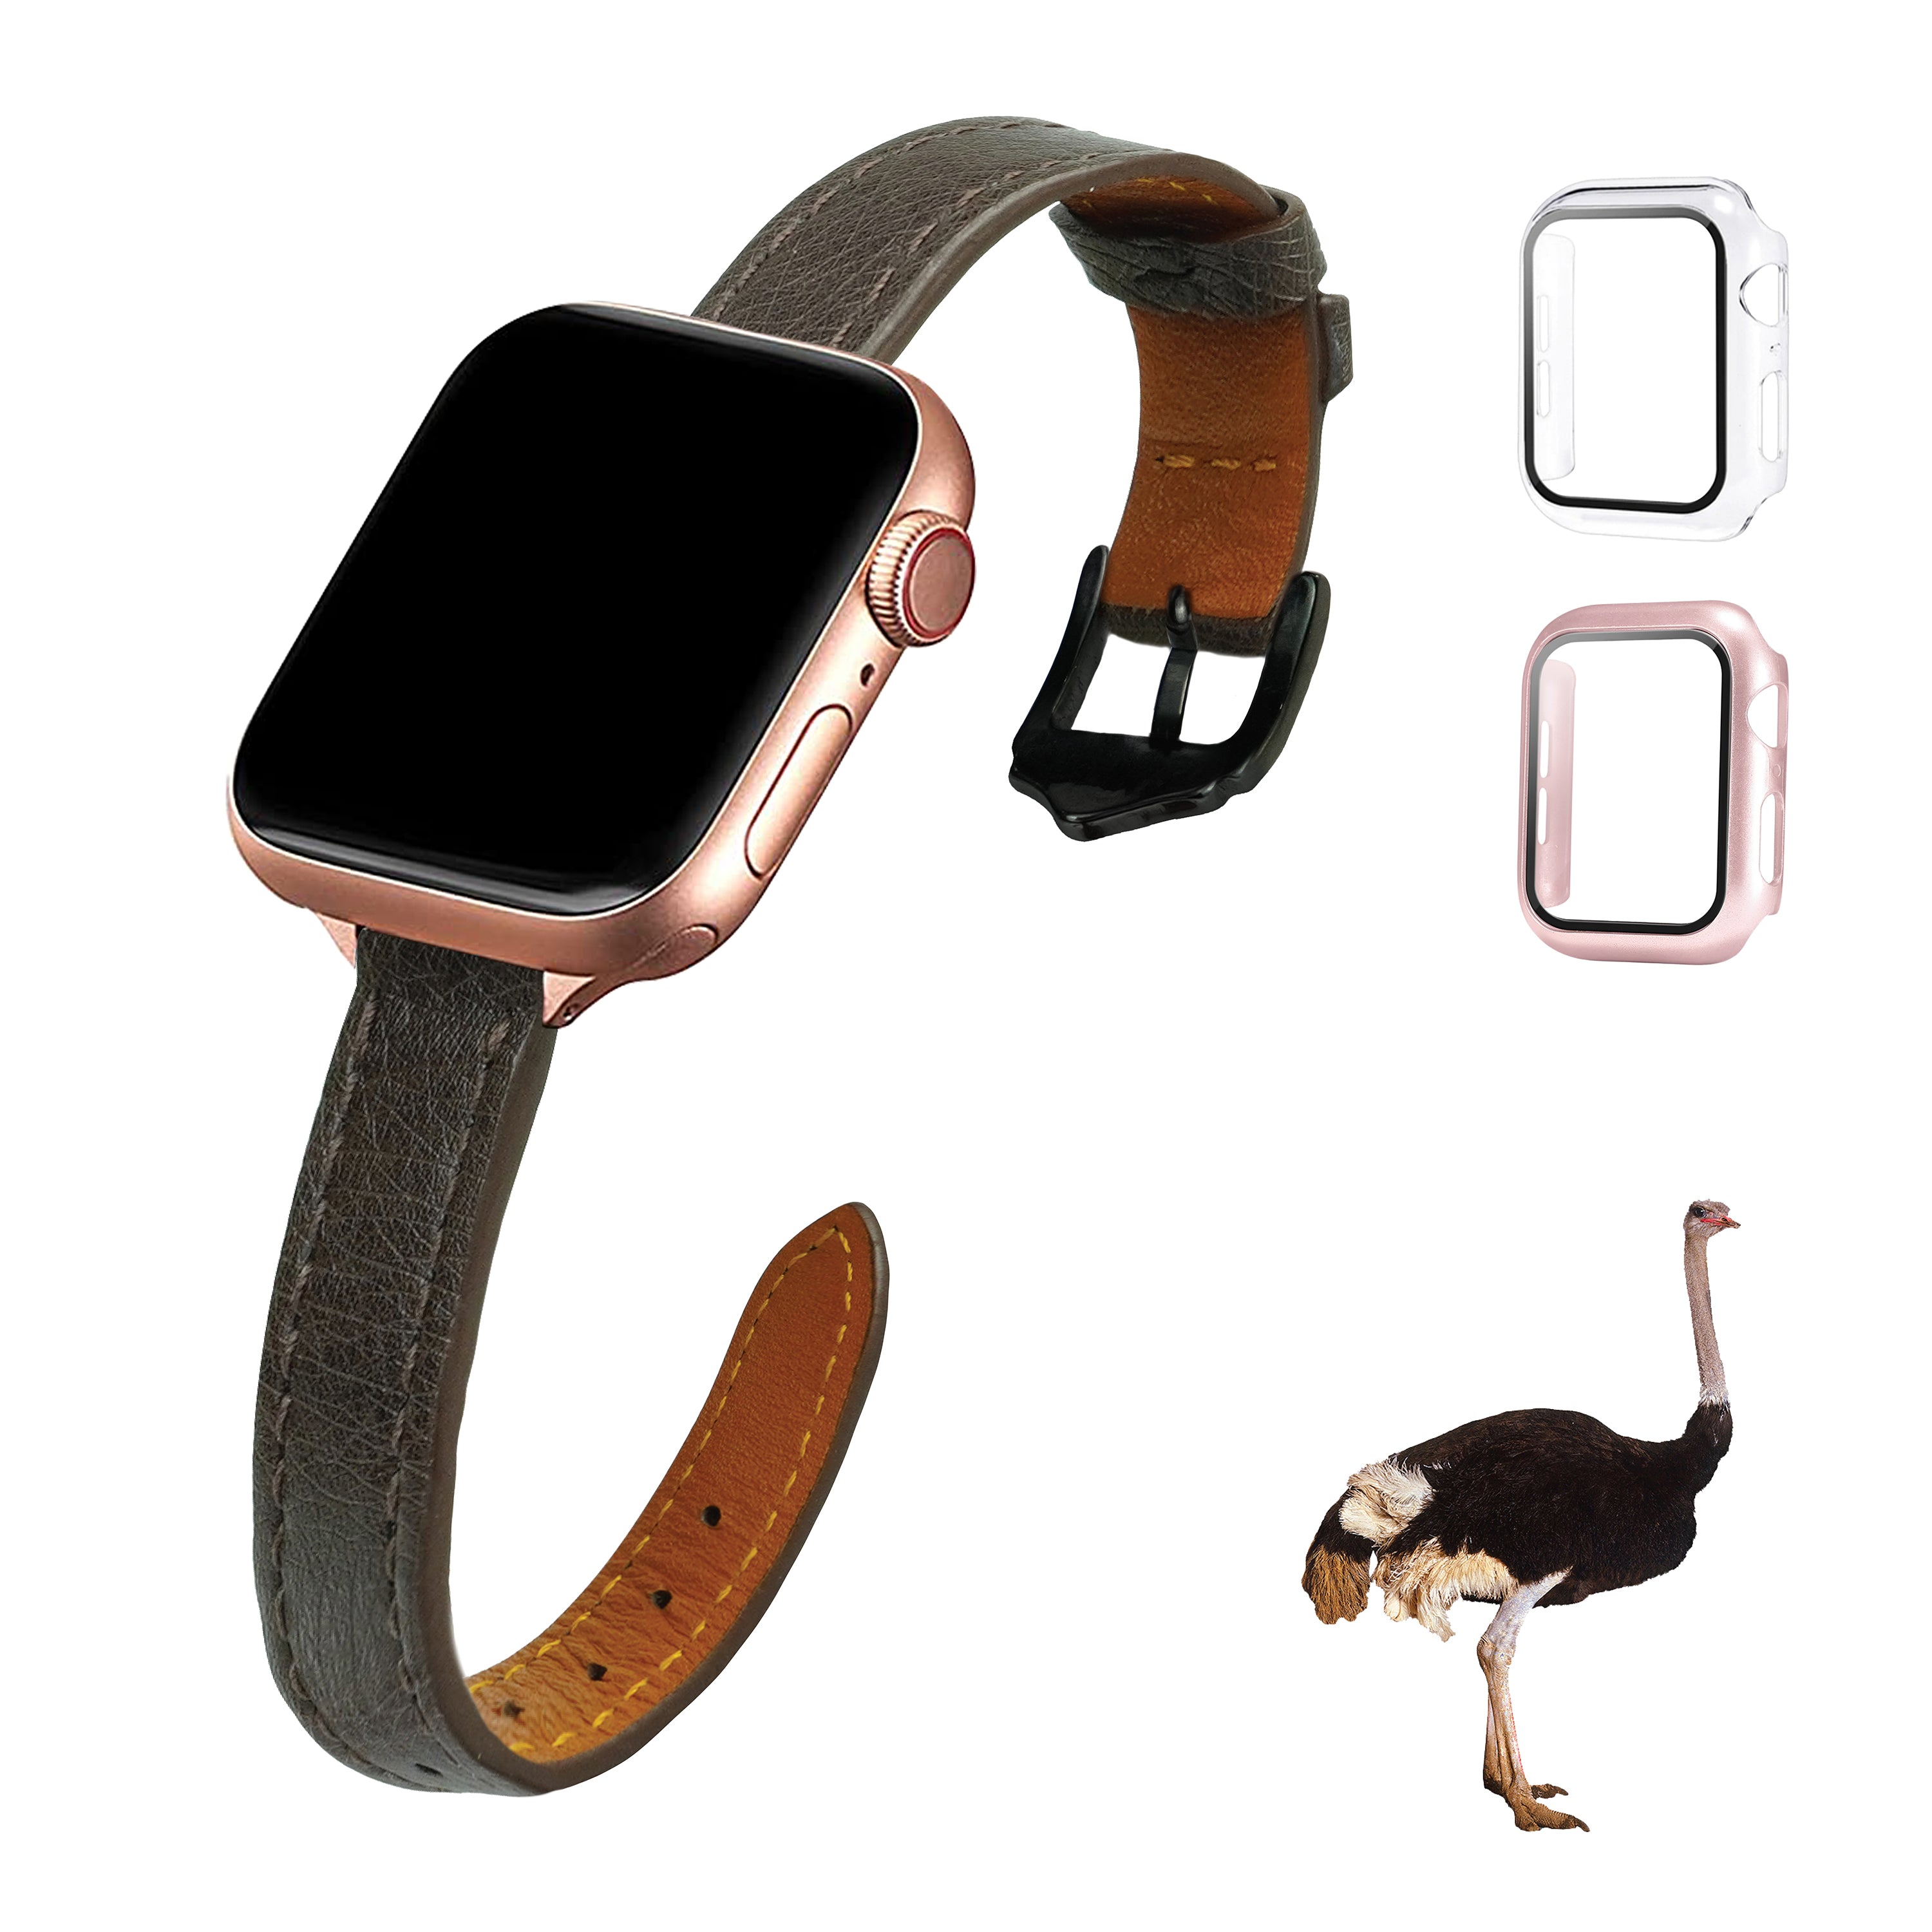 Dark Brown Flat Ostrich Leather Band Compatible Apple Watch Iwatch 38mm Screen Protector Case Black Adapter Replacement Strap For Smartwatch Series 1 2 3 Leather Handmade AW-183B-W-38MM